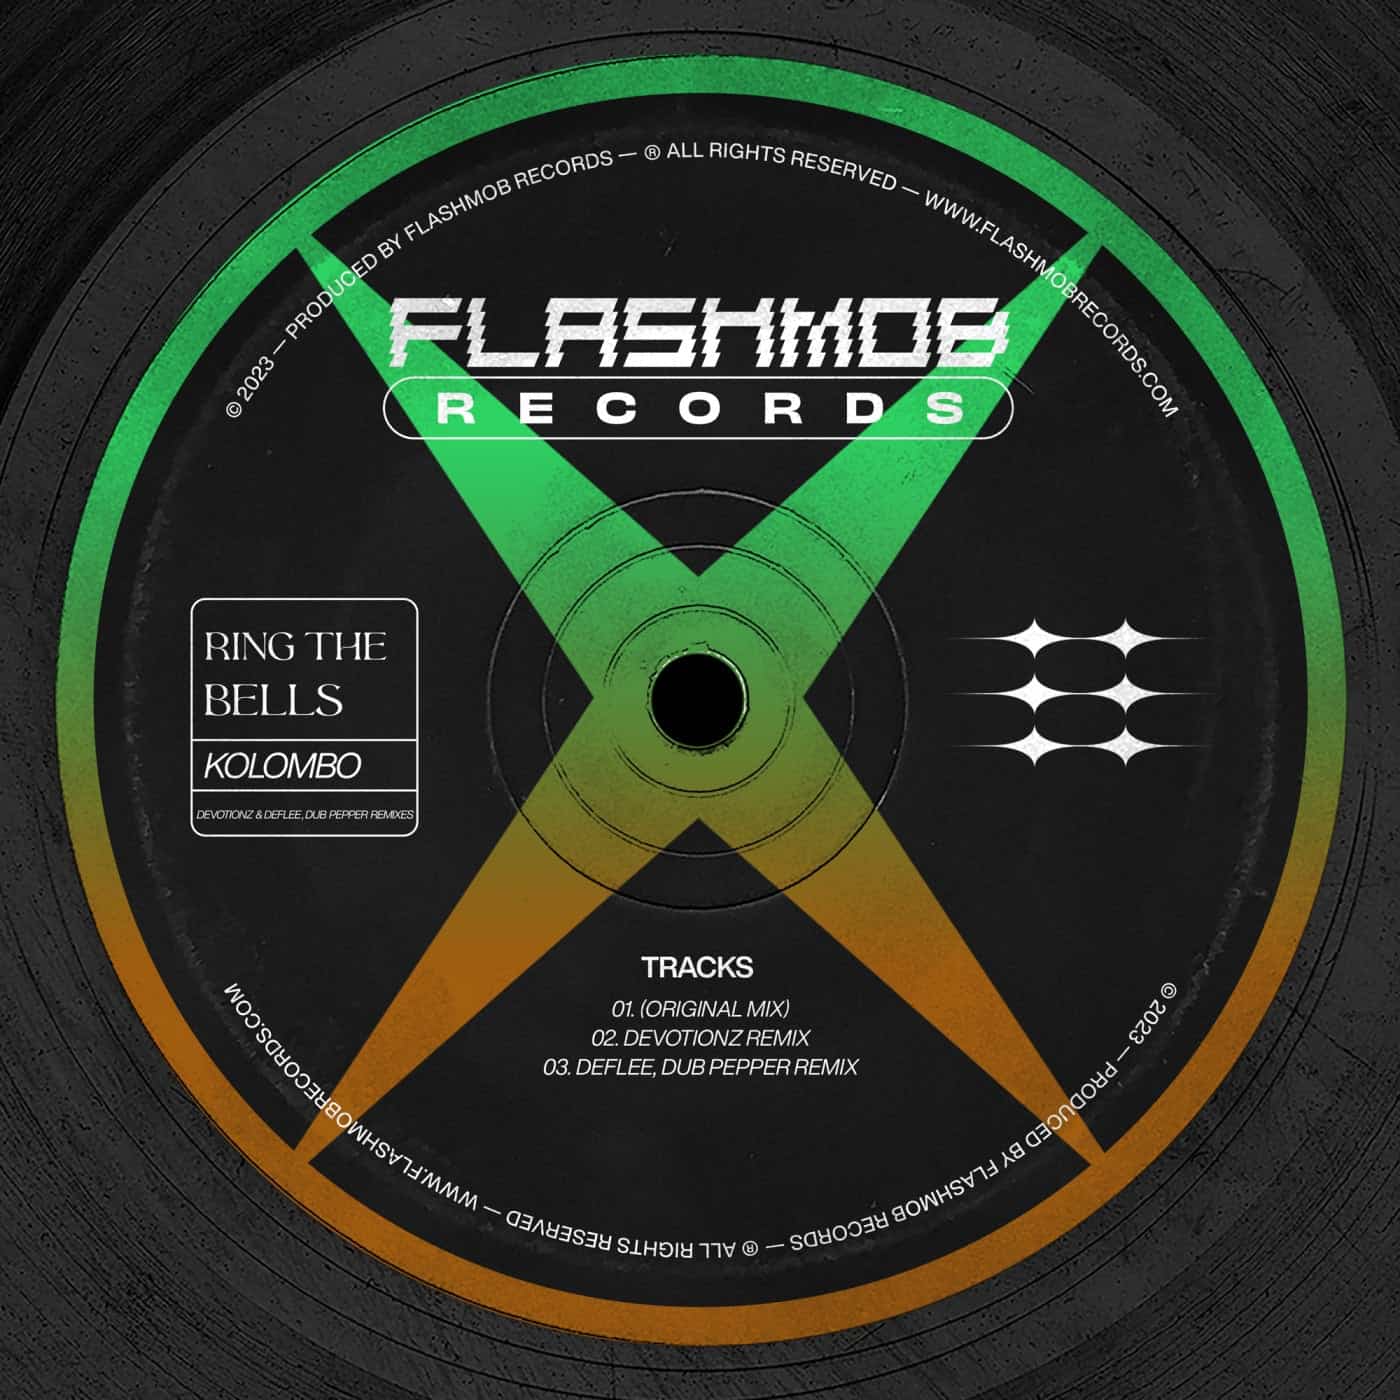 image cover: Ring The Bells by Kolombo on Flashmob Records